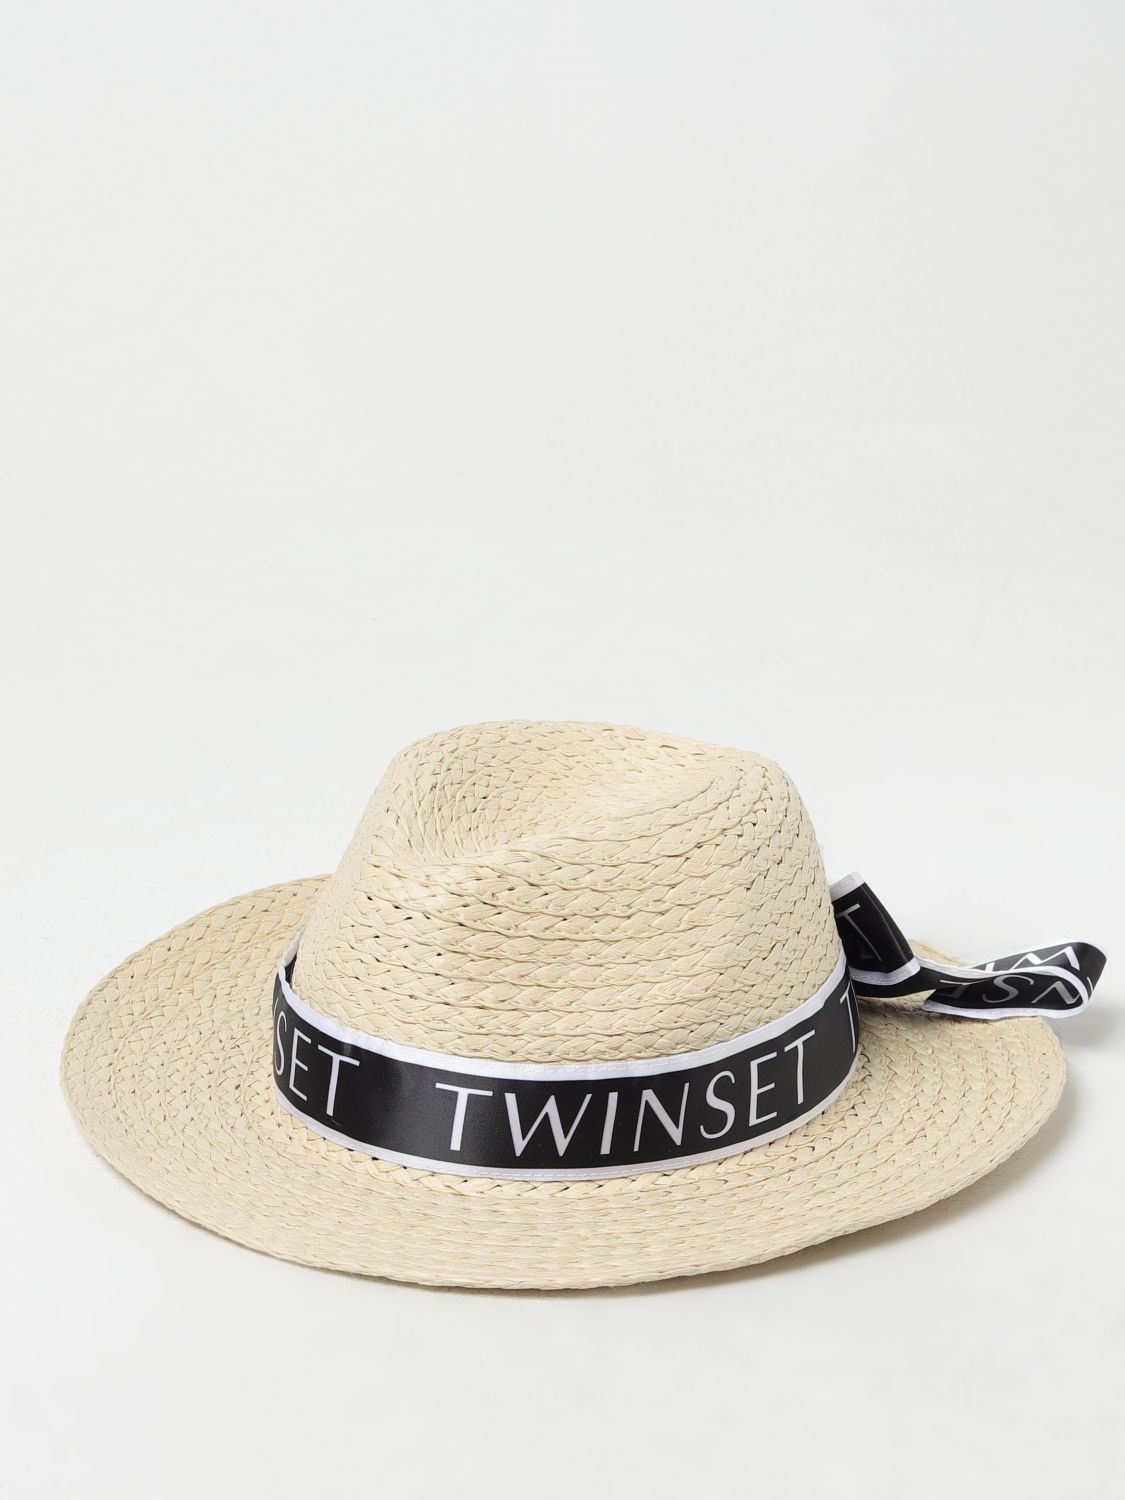 Twinset Girls' Hats  Kids Color Natural